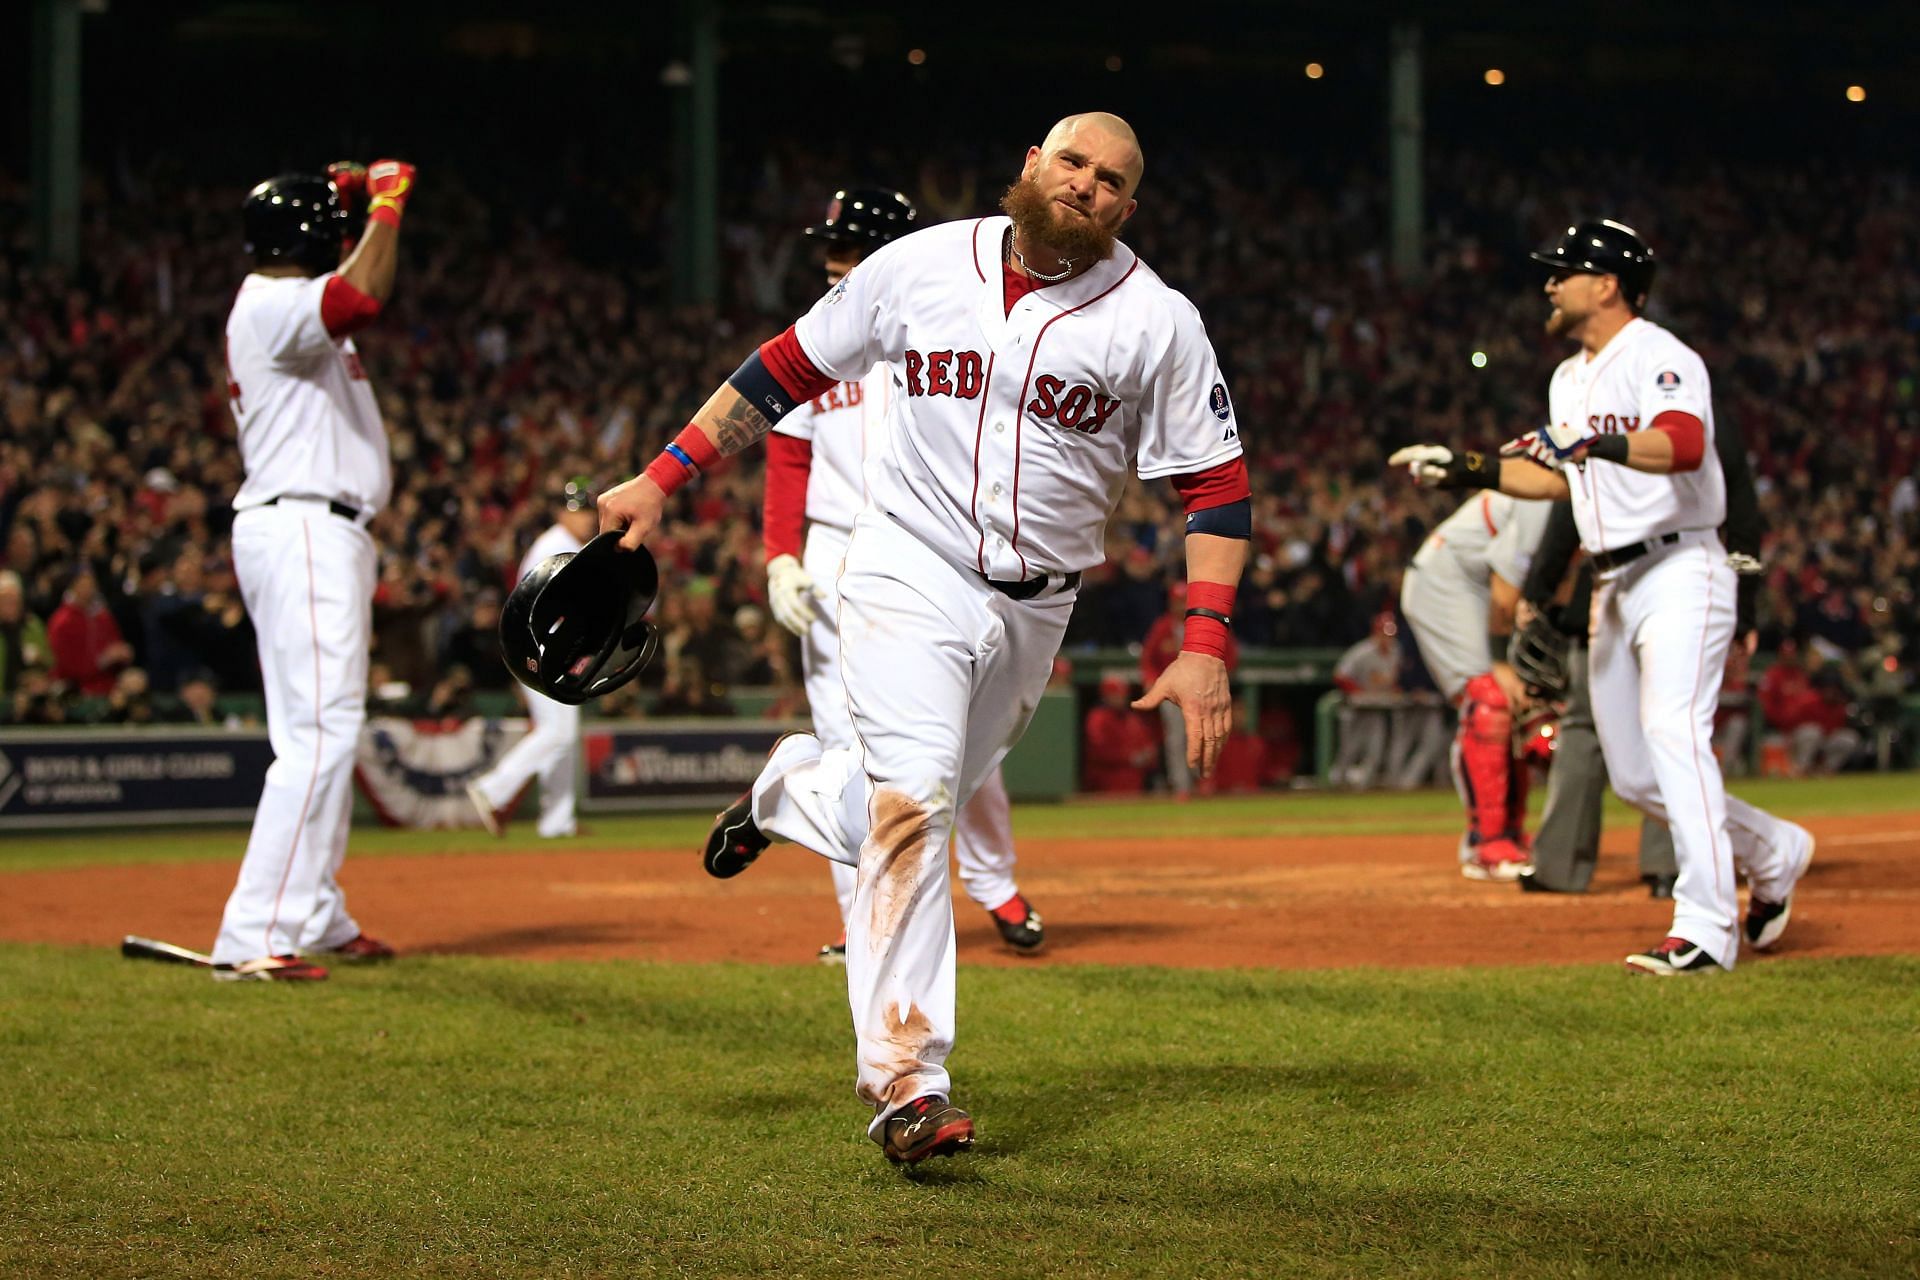 Jonny Gomes looks to represent the Boston Red Sox in 2022